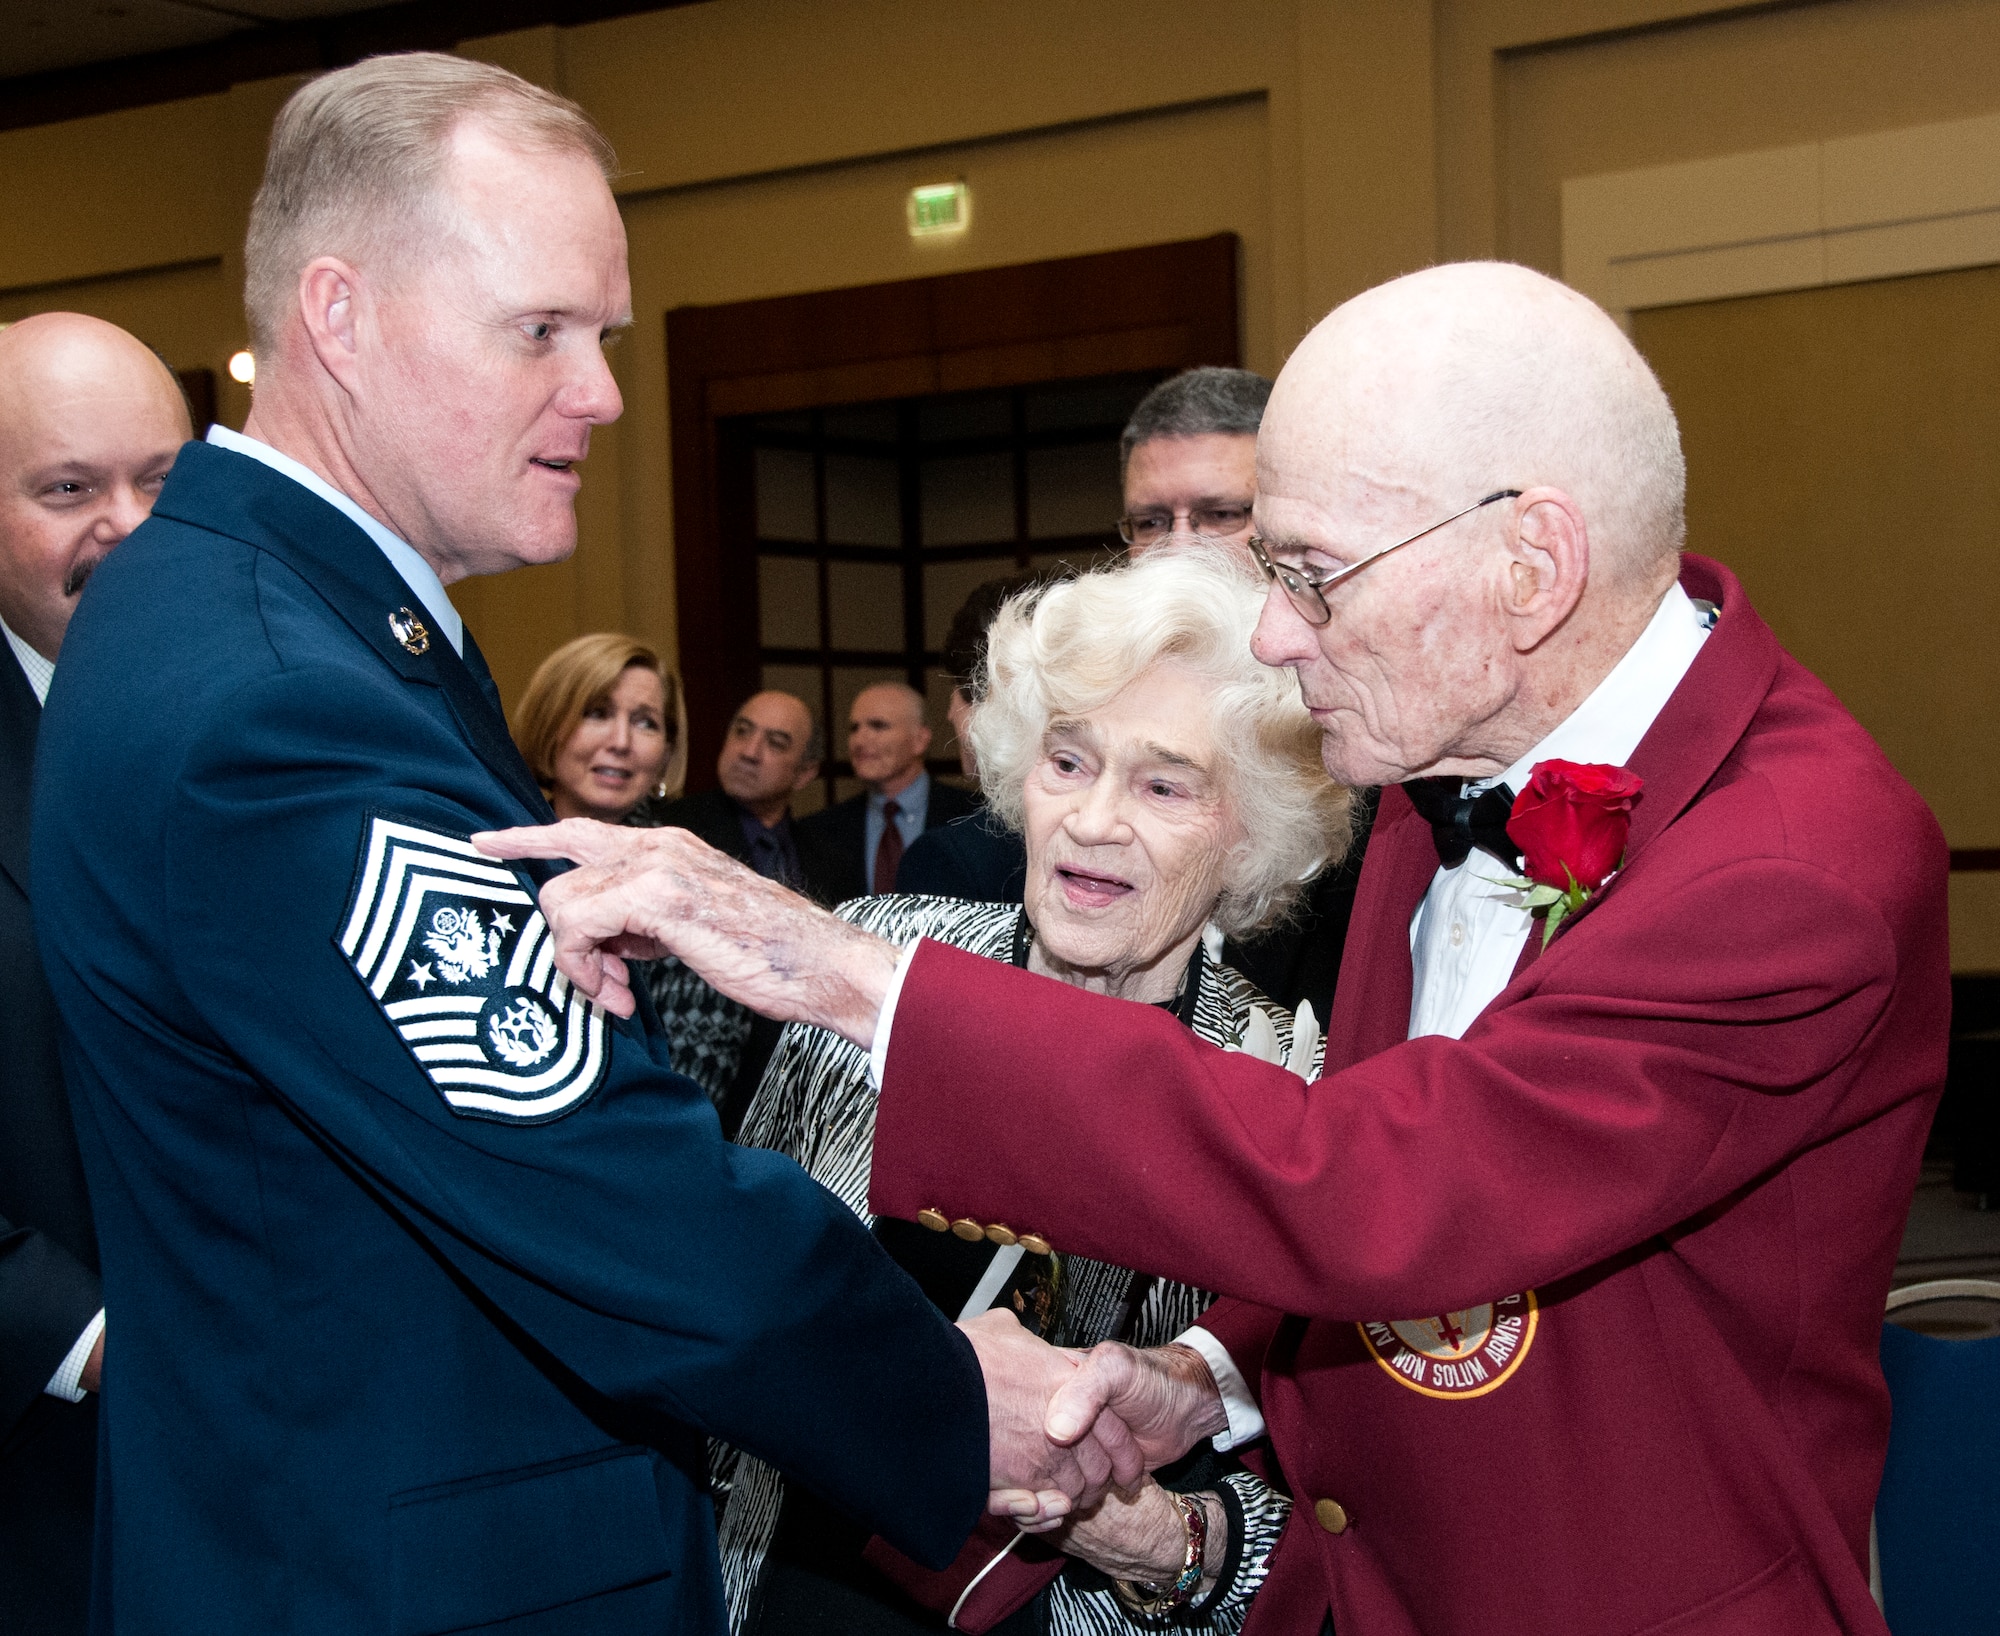 Chief Master Sgt. of the Air Force James A. Cody talks with Don Scott, a B-17 bomber crew member and Prisoner of War from WWII, at the Atlanta Regional Military Appreciation Committee in Marietta, Ga. Nov. 17, 2014. Cody spoke the ARMAC for its 62nd annual luncheon. (U.S. Air Force photo by Senior Airman Daniel Phelps/Released)